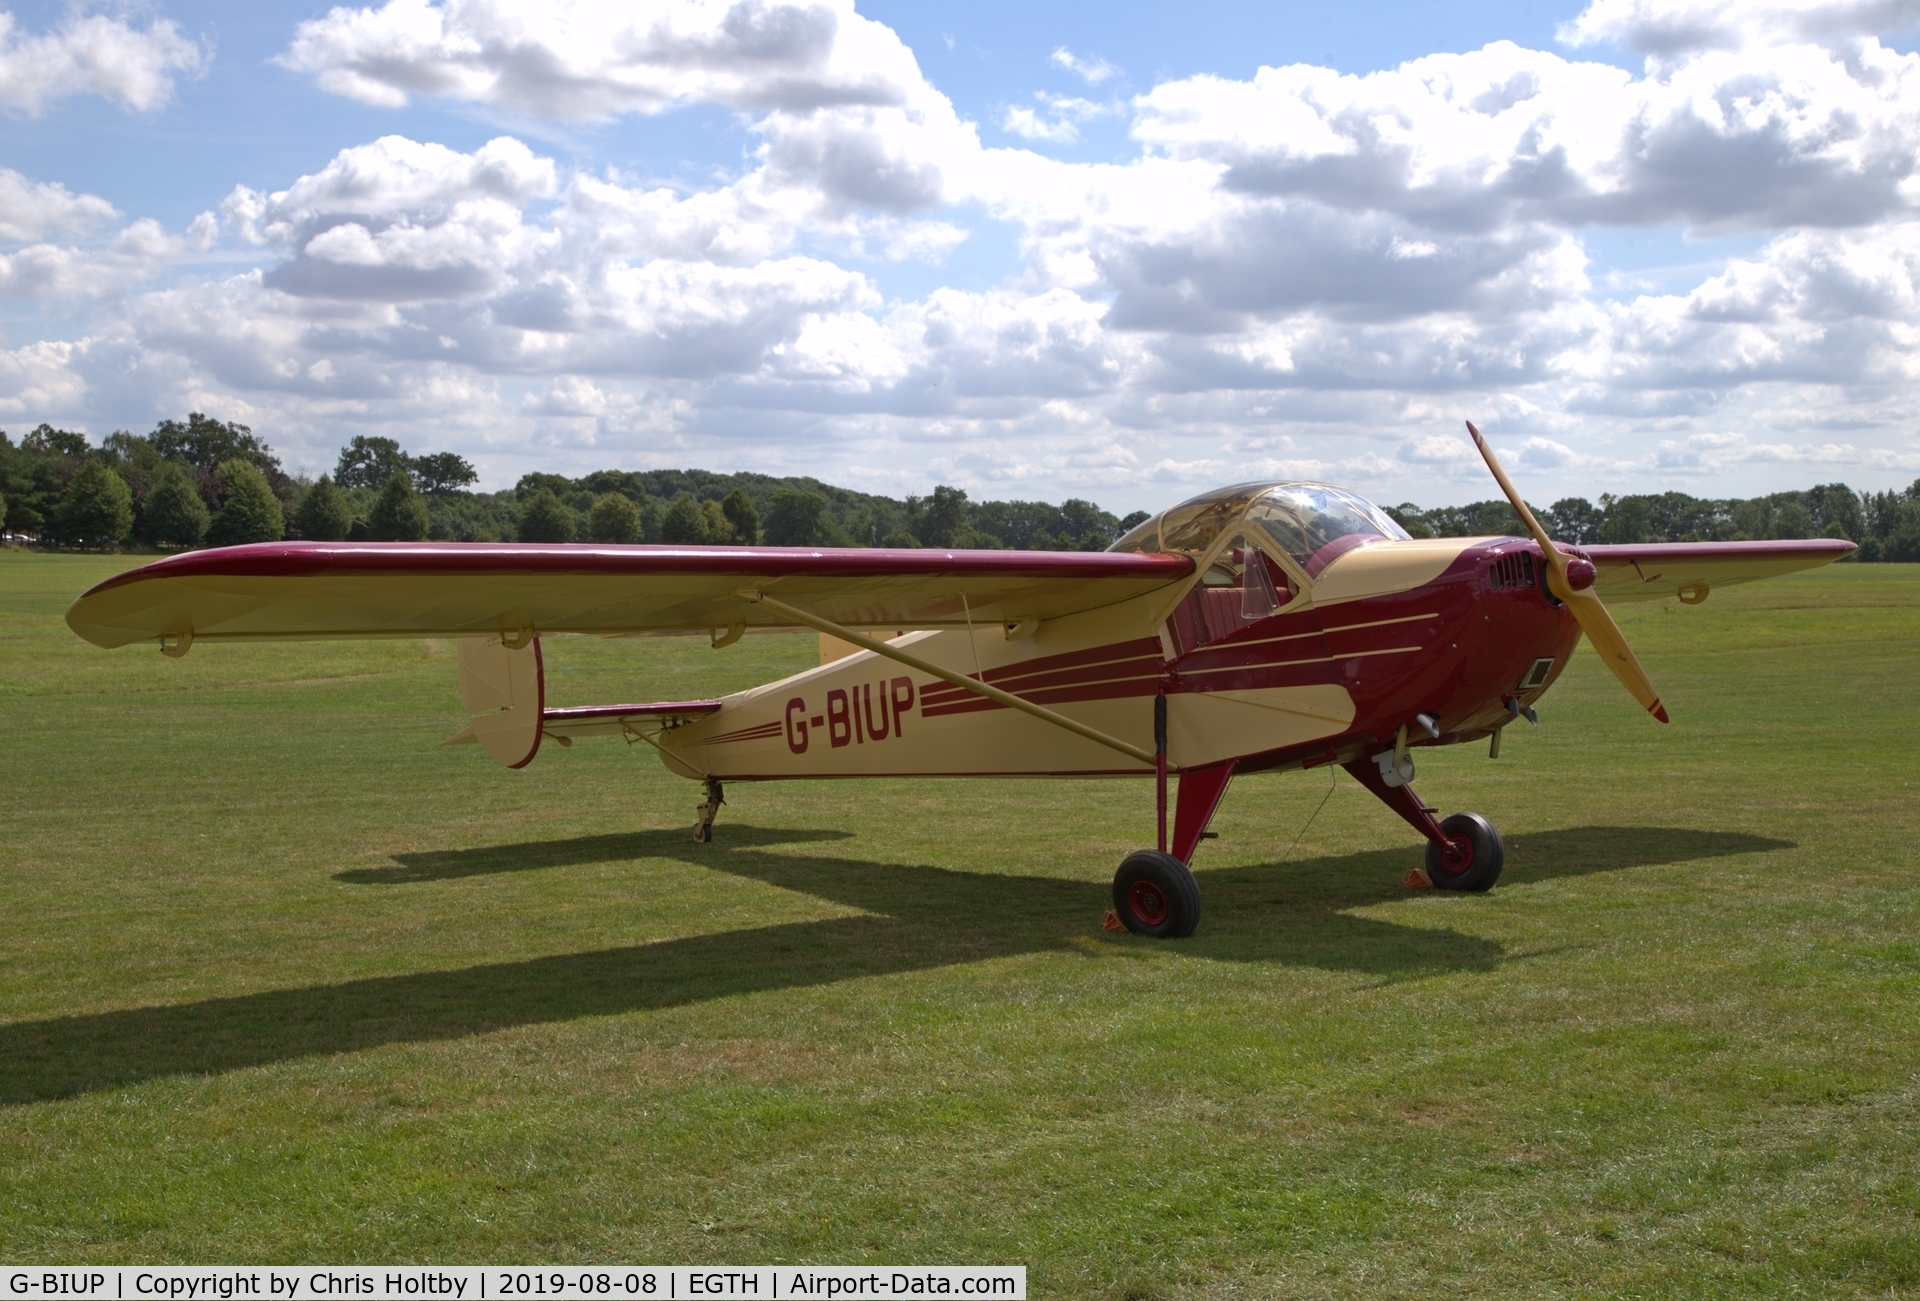 G-BIUP, 1950 Nord NC-854S C/N 54, Welcome visitor to the Gathering of Moths Day 2019 at Old Warden